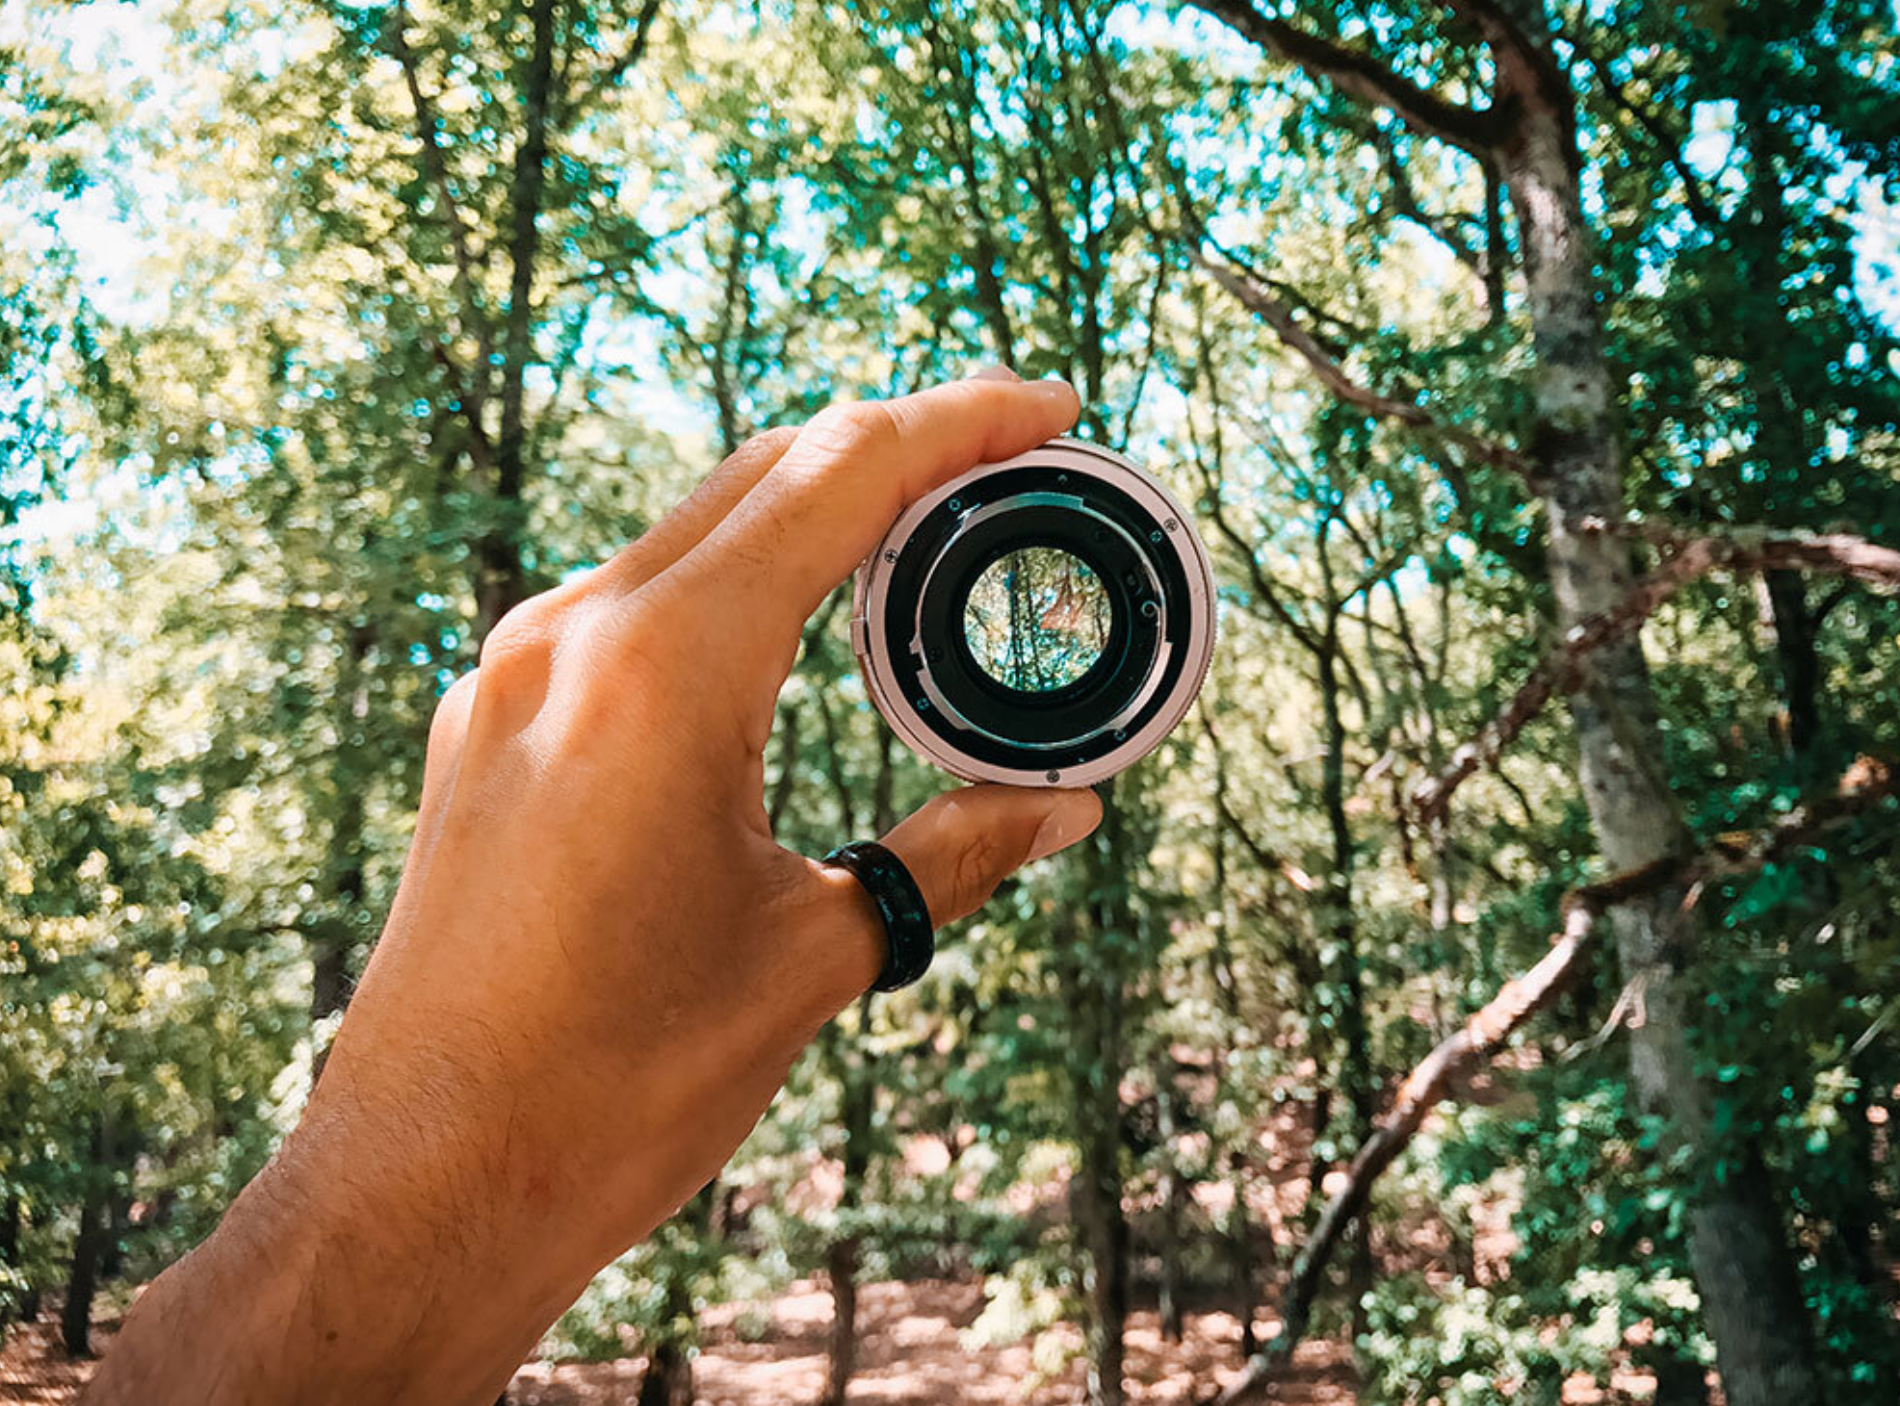 hand holding a camera lens in the air with trees in the background